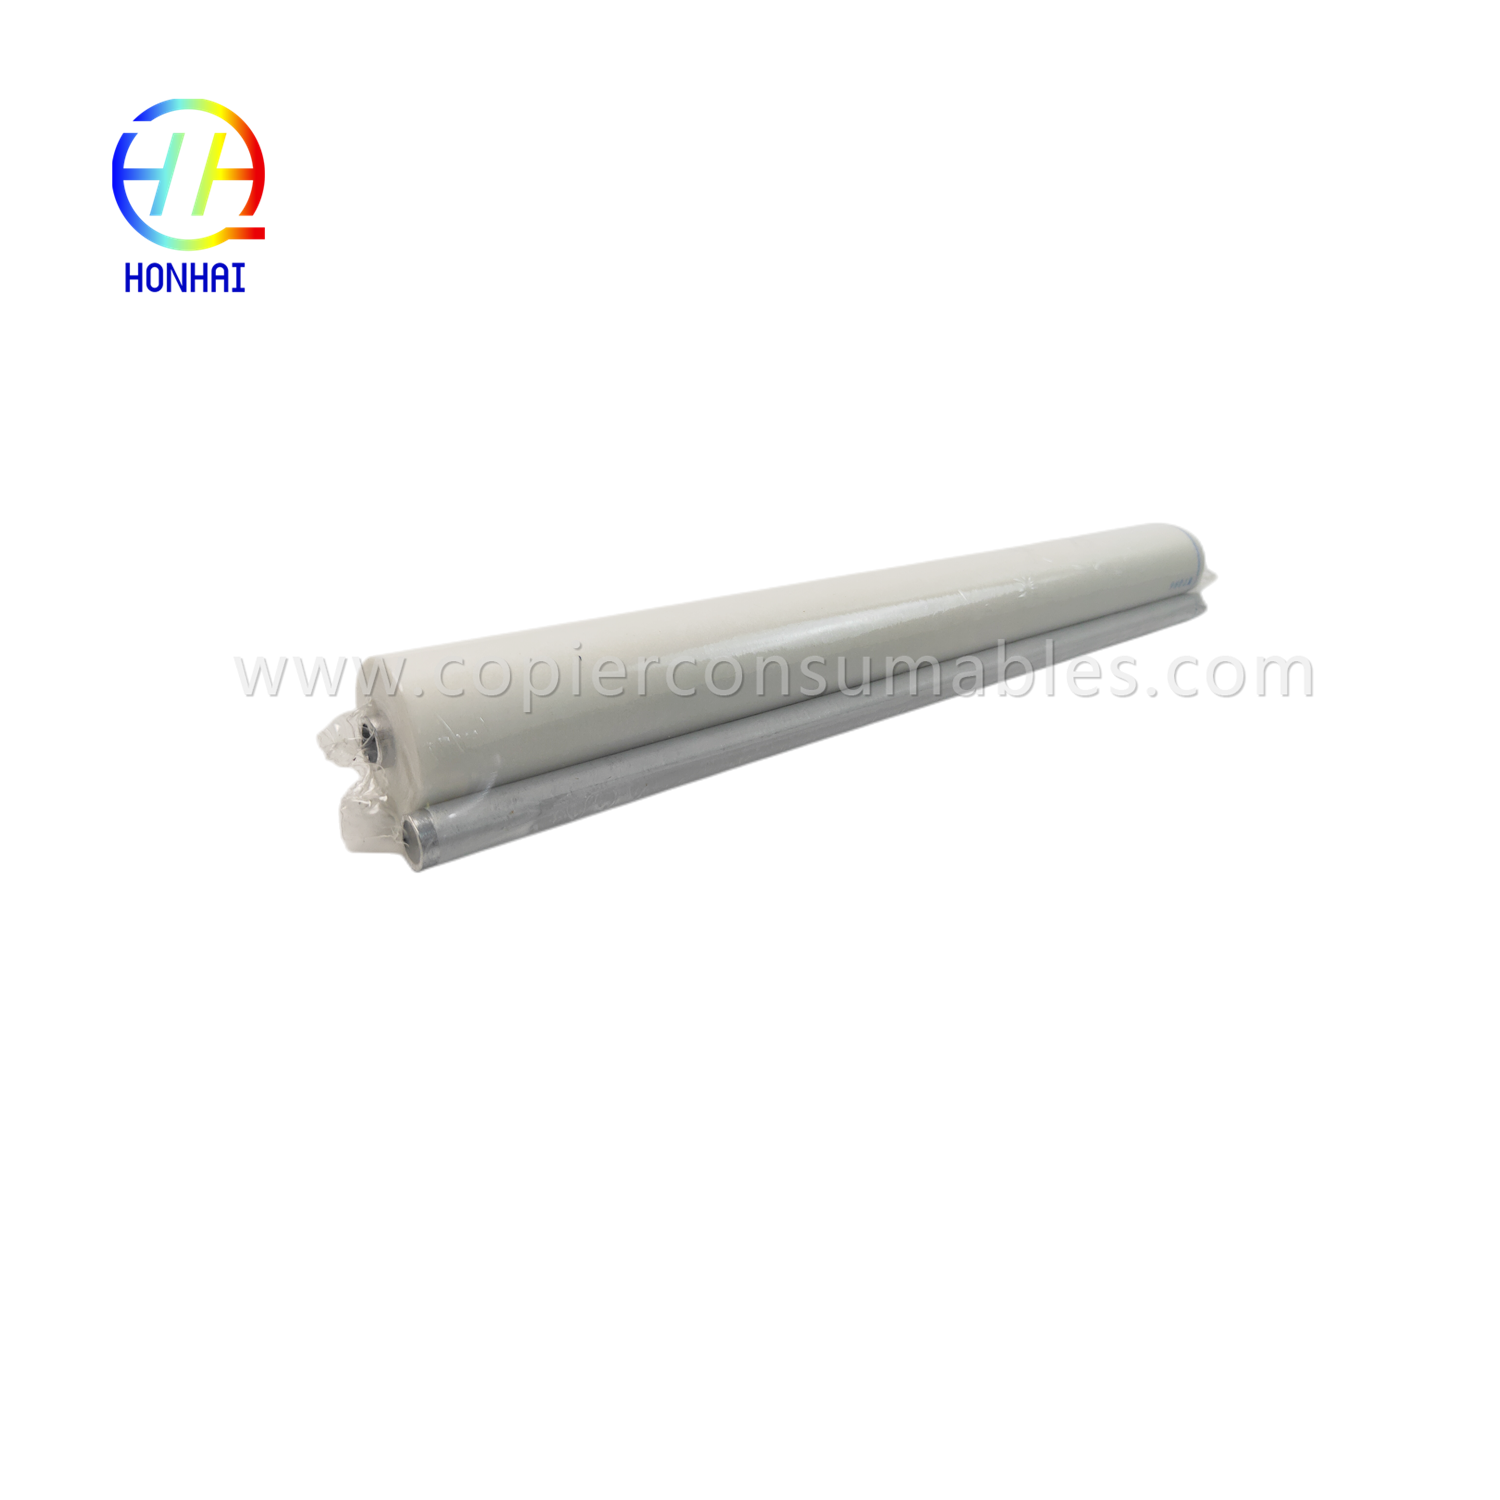 https://c585.goodao.net/fuser-cleaning-web-for-canon-ir6800-ir-8085-8095-8105-8205-8285-8295-fq-009-fc5-2286-000-oem-fuser-cleaning-fuser-roller-product/